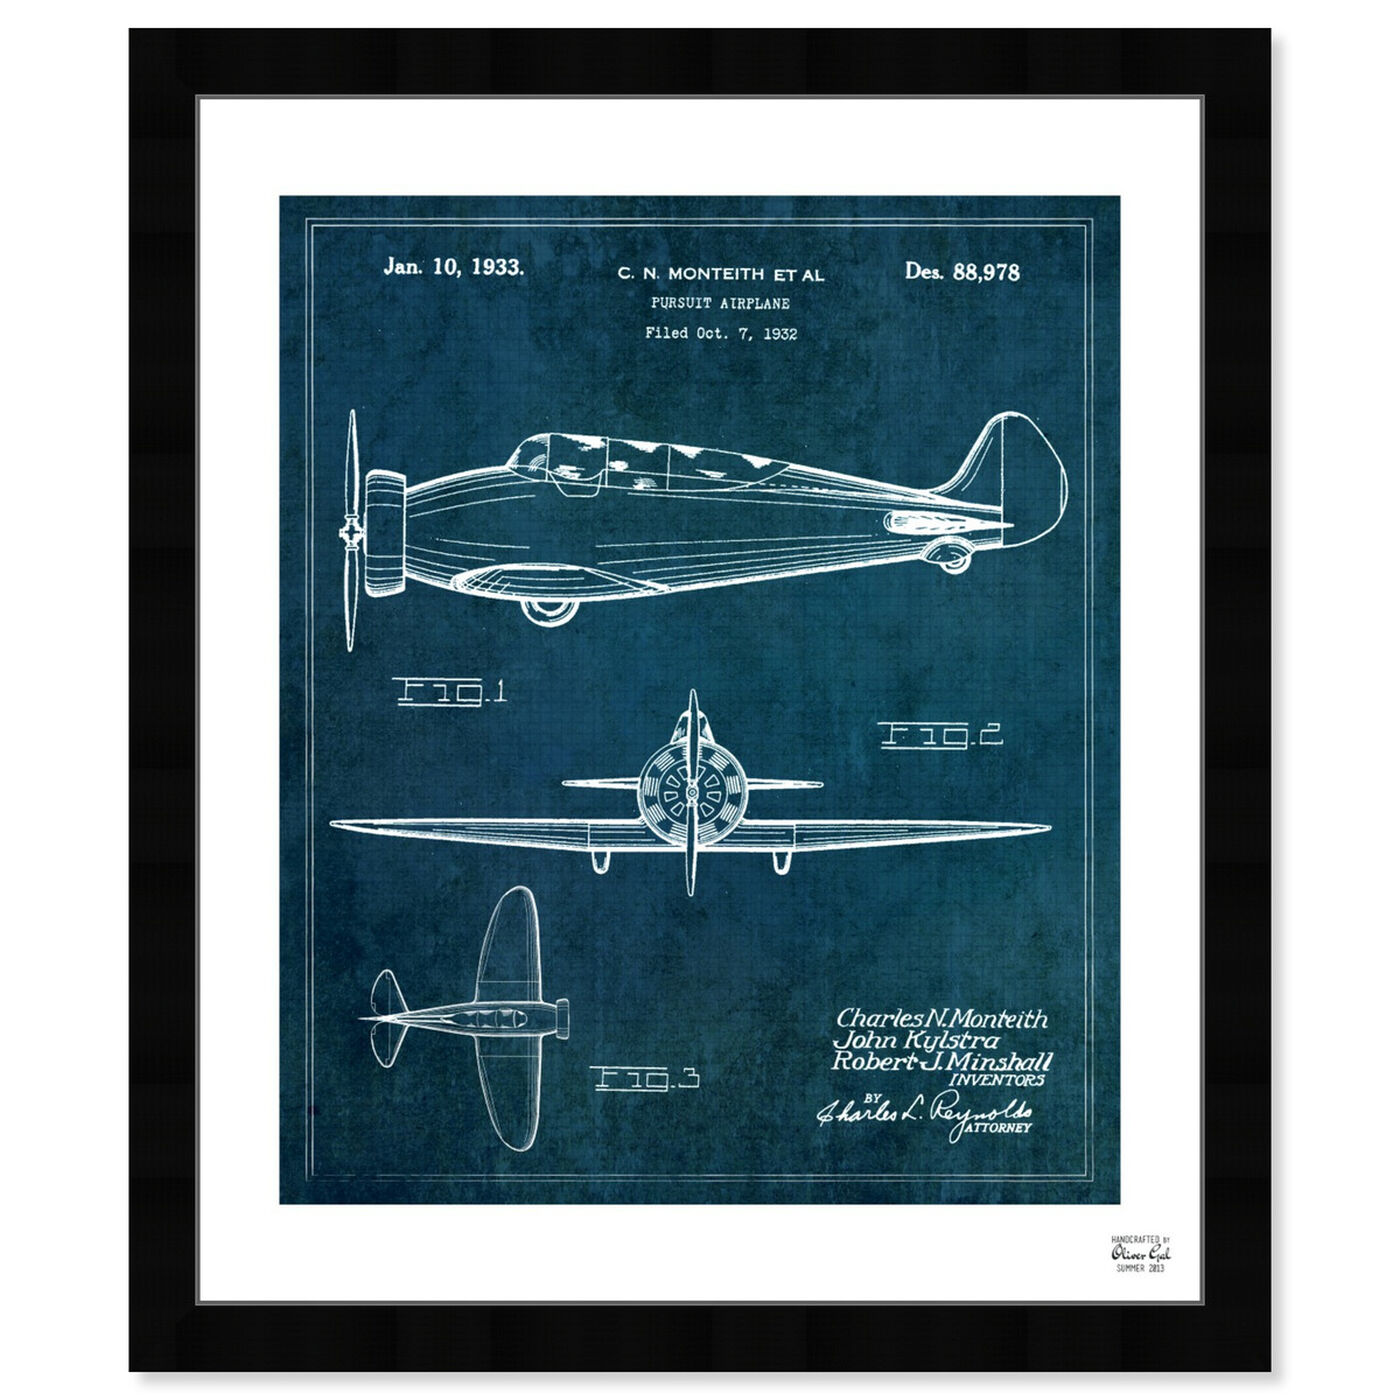 Front view of Pursuit Airplane 1933 featuring transportation and airplanes art.